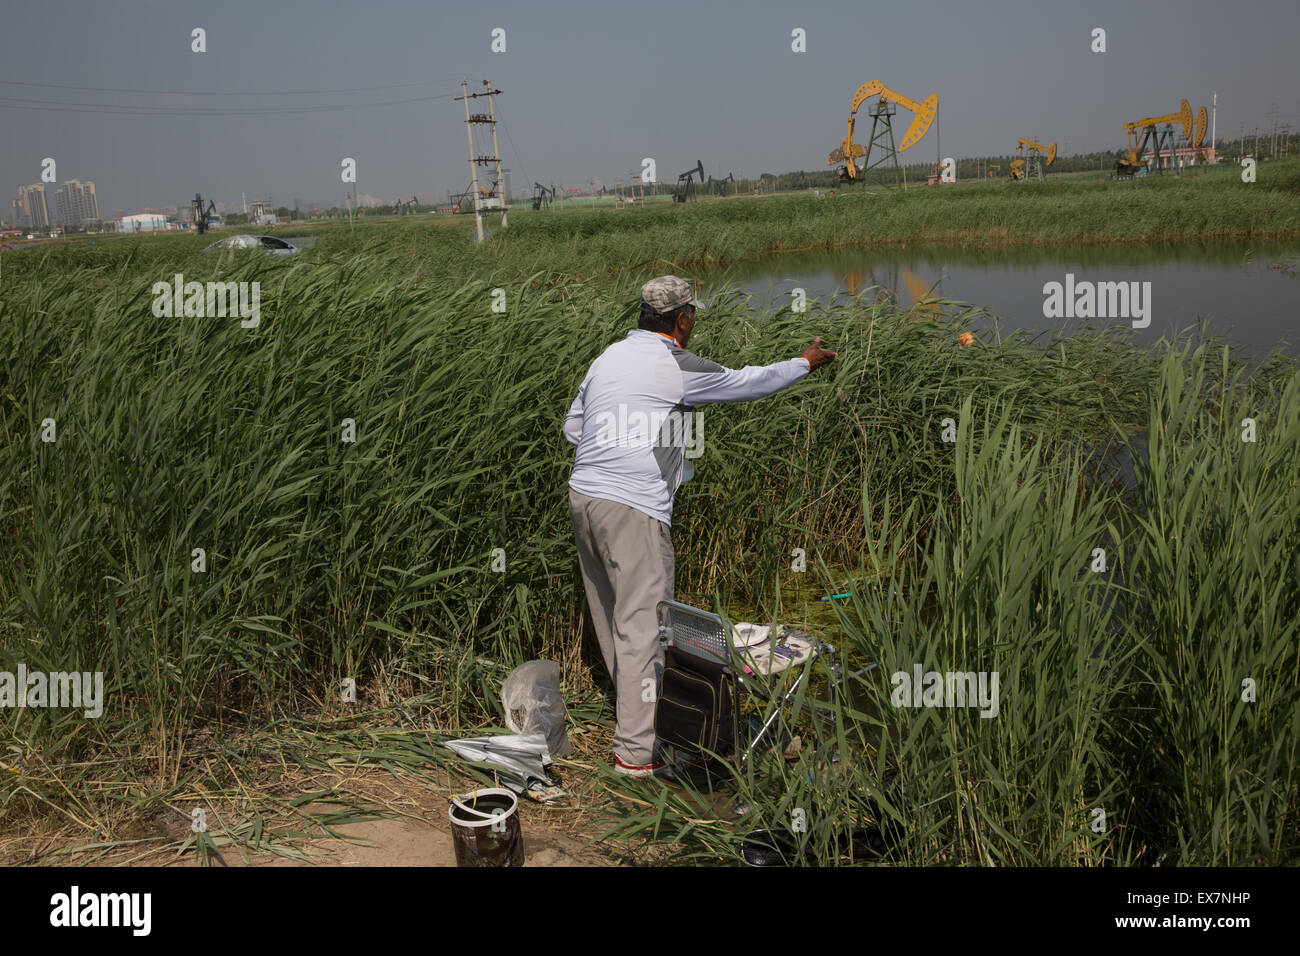 Daqing, China's Heilongjiang Province. 7th July, 2015. A man fishes near oil pumps in Daqing, northeast China's Heilongjiang Province, July 7, 2015. Daqing oilfield was discovered in 1959, which is the largest inland oilfield in China. On the 4,300 square kilometers oilfield, there are some 50,000 oil wells. © Jin Liwang/Xinhua/Alamy Live News Stock Photo